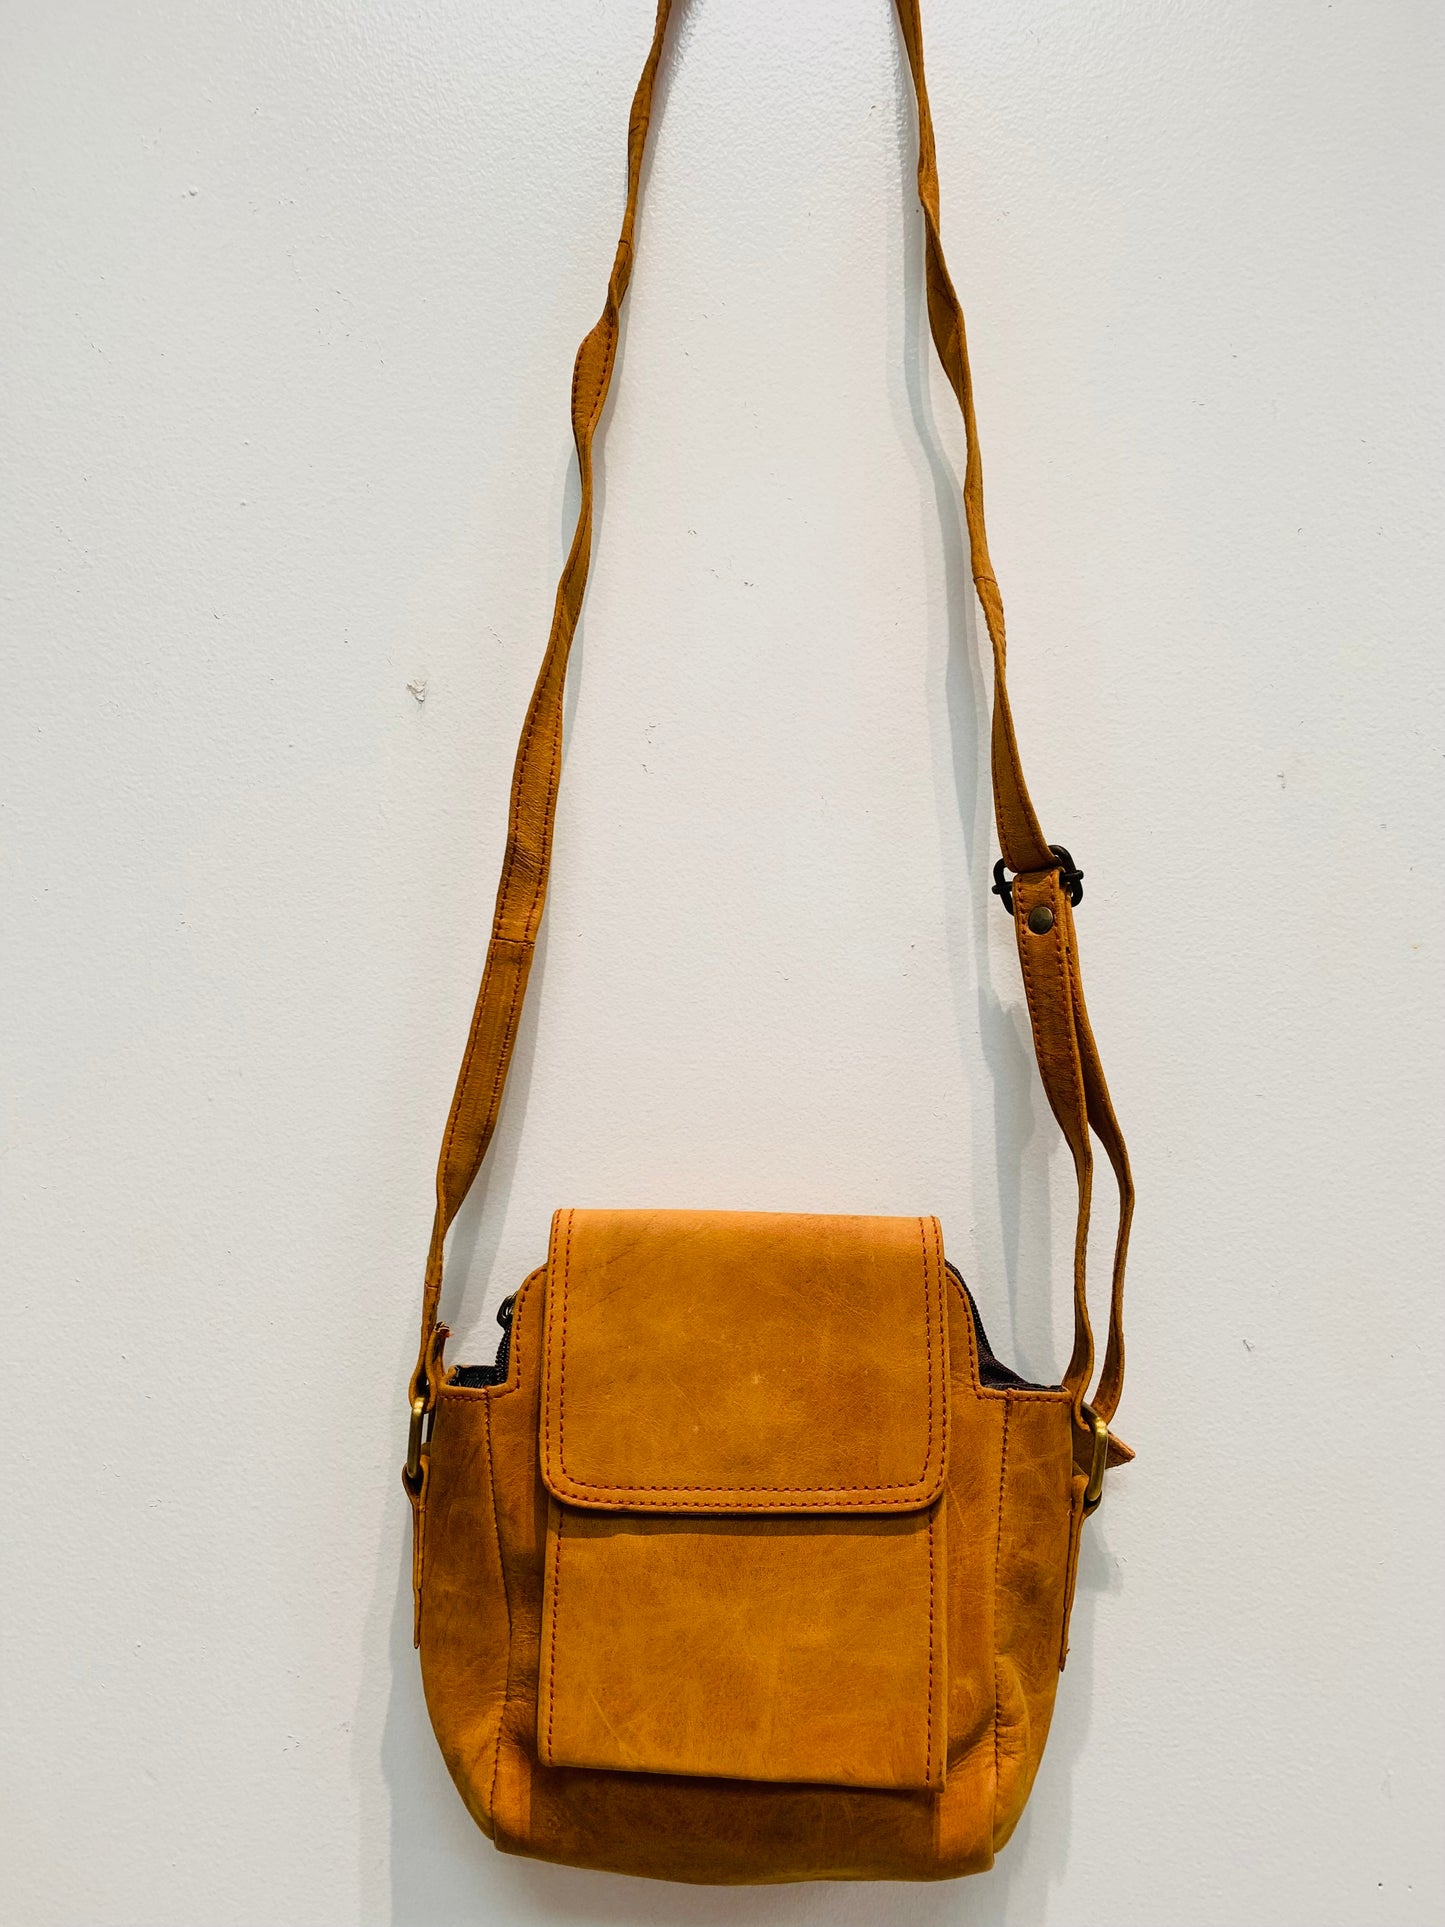 BOHEMIAN STATEMENT HANDCRAFTED GENUINE LEATHER BAG #LEA1030